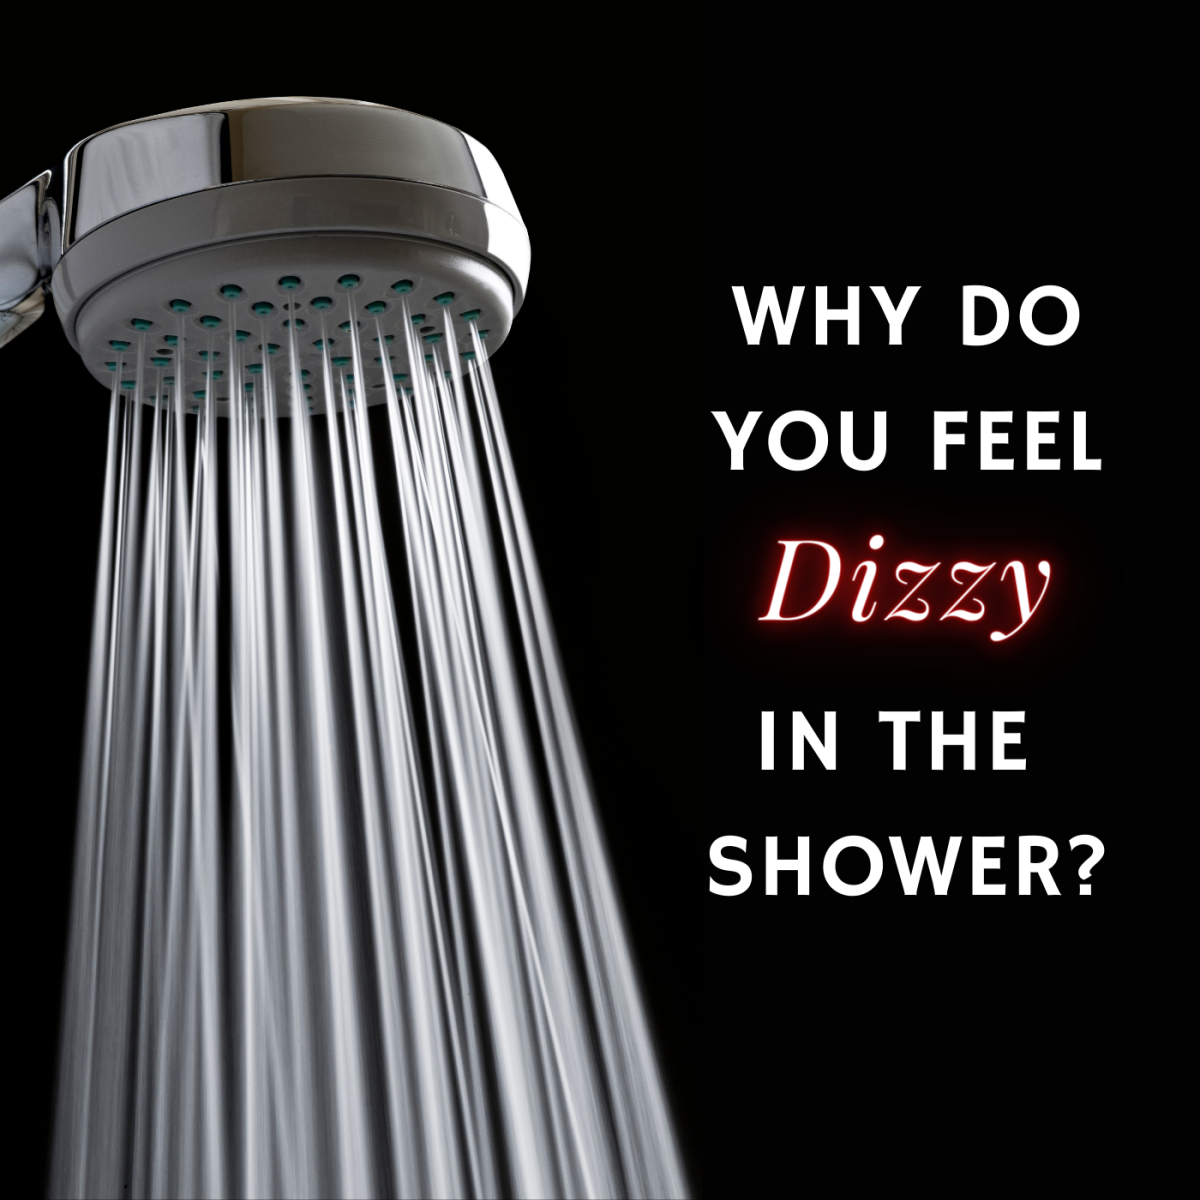 What Is the Cause of Feeling Dizzy or Faint After a Shower?